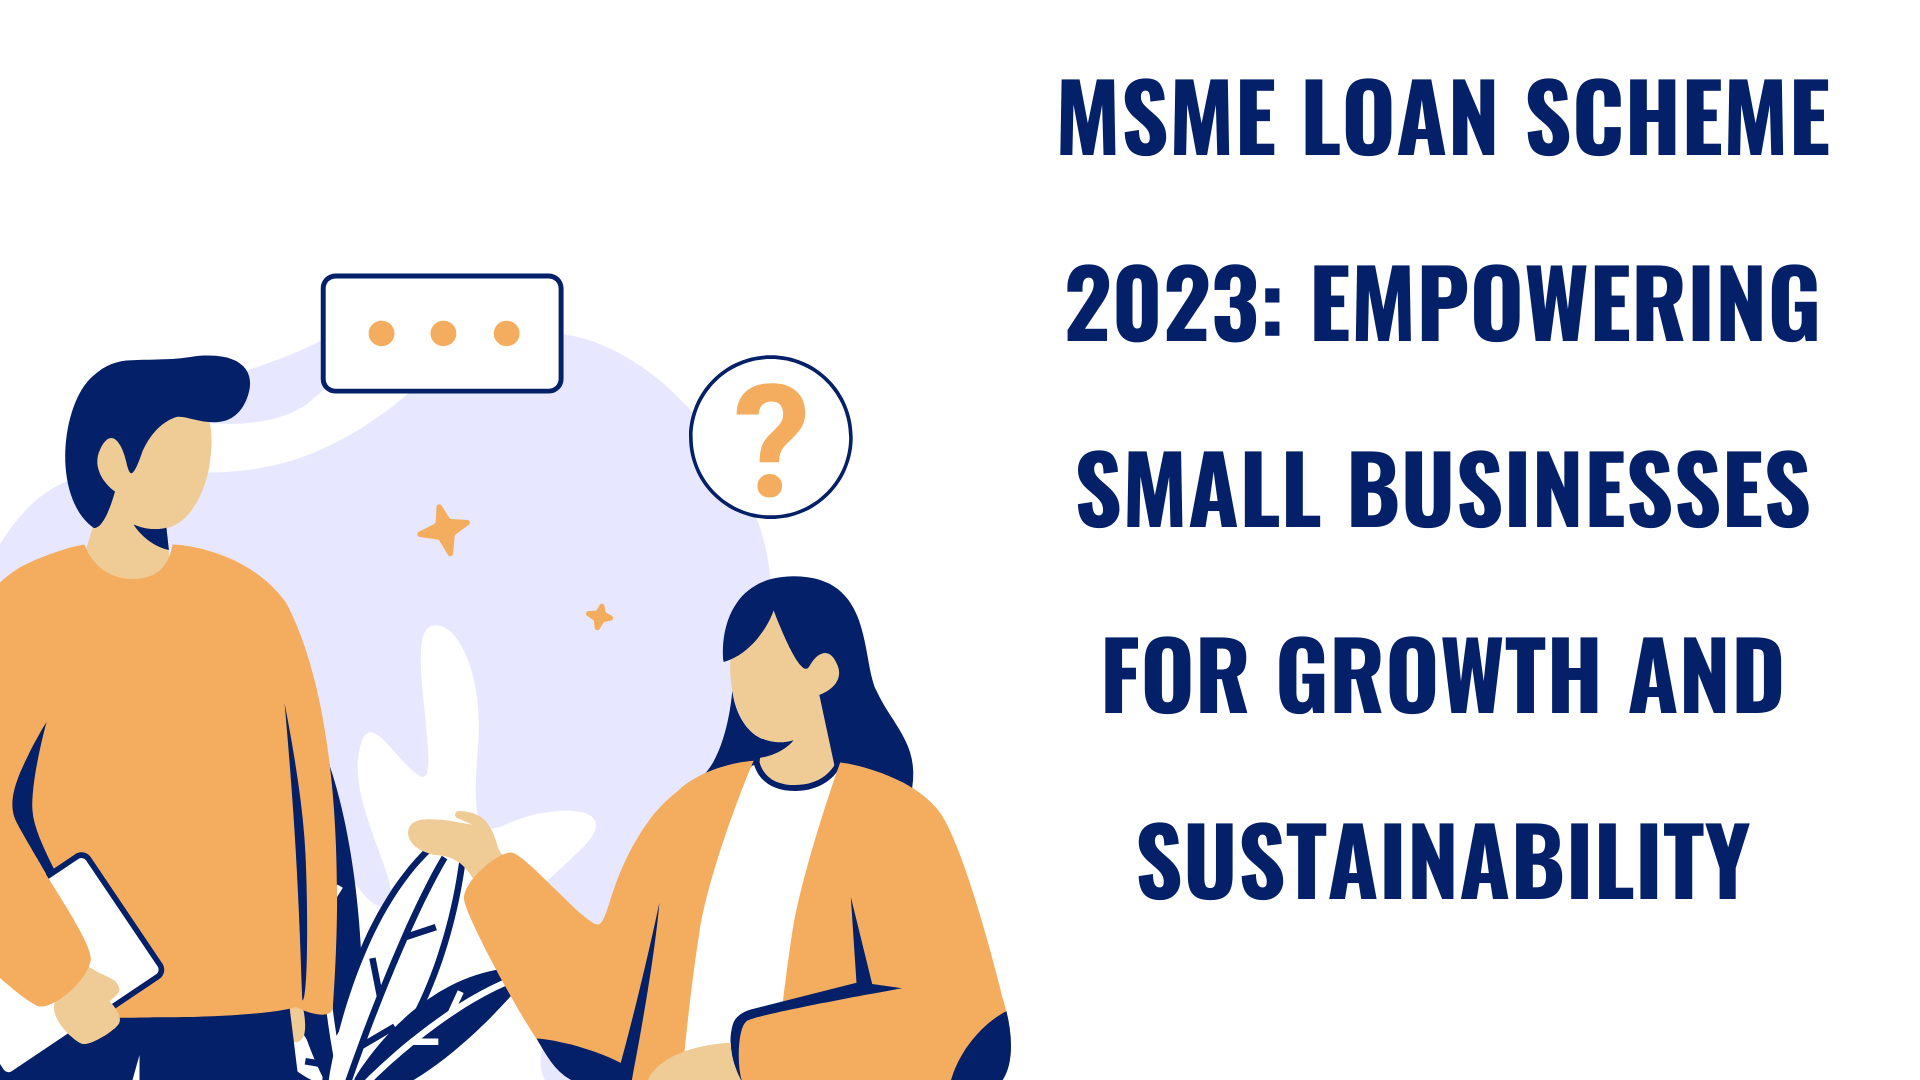 MSME Loan Scheme 2023 Empowering Small Businesses for Growth and Sustainability